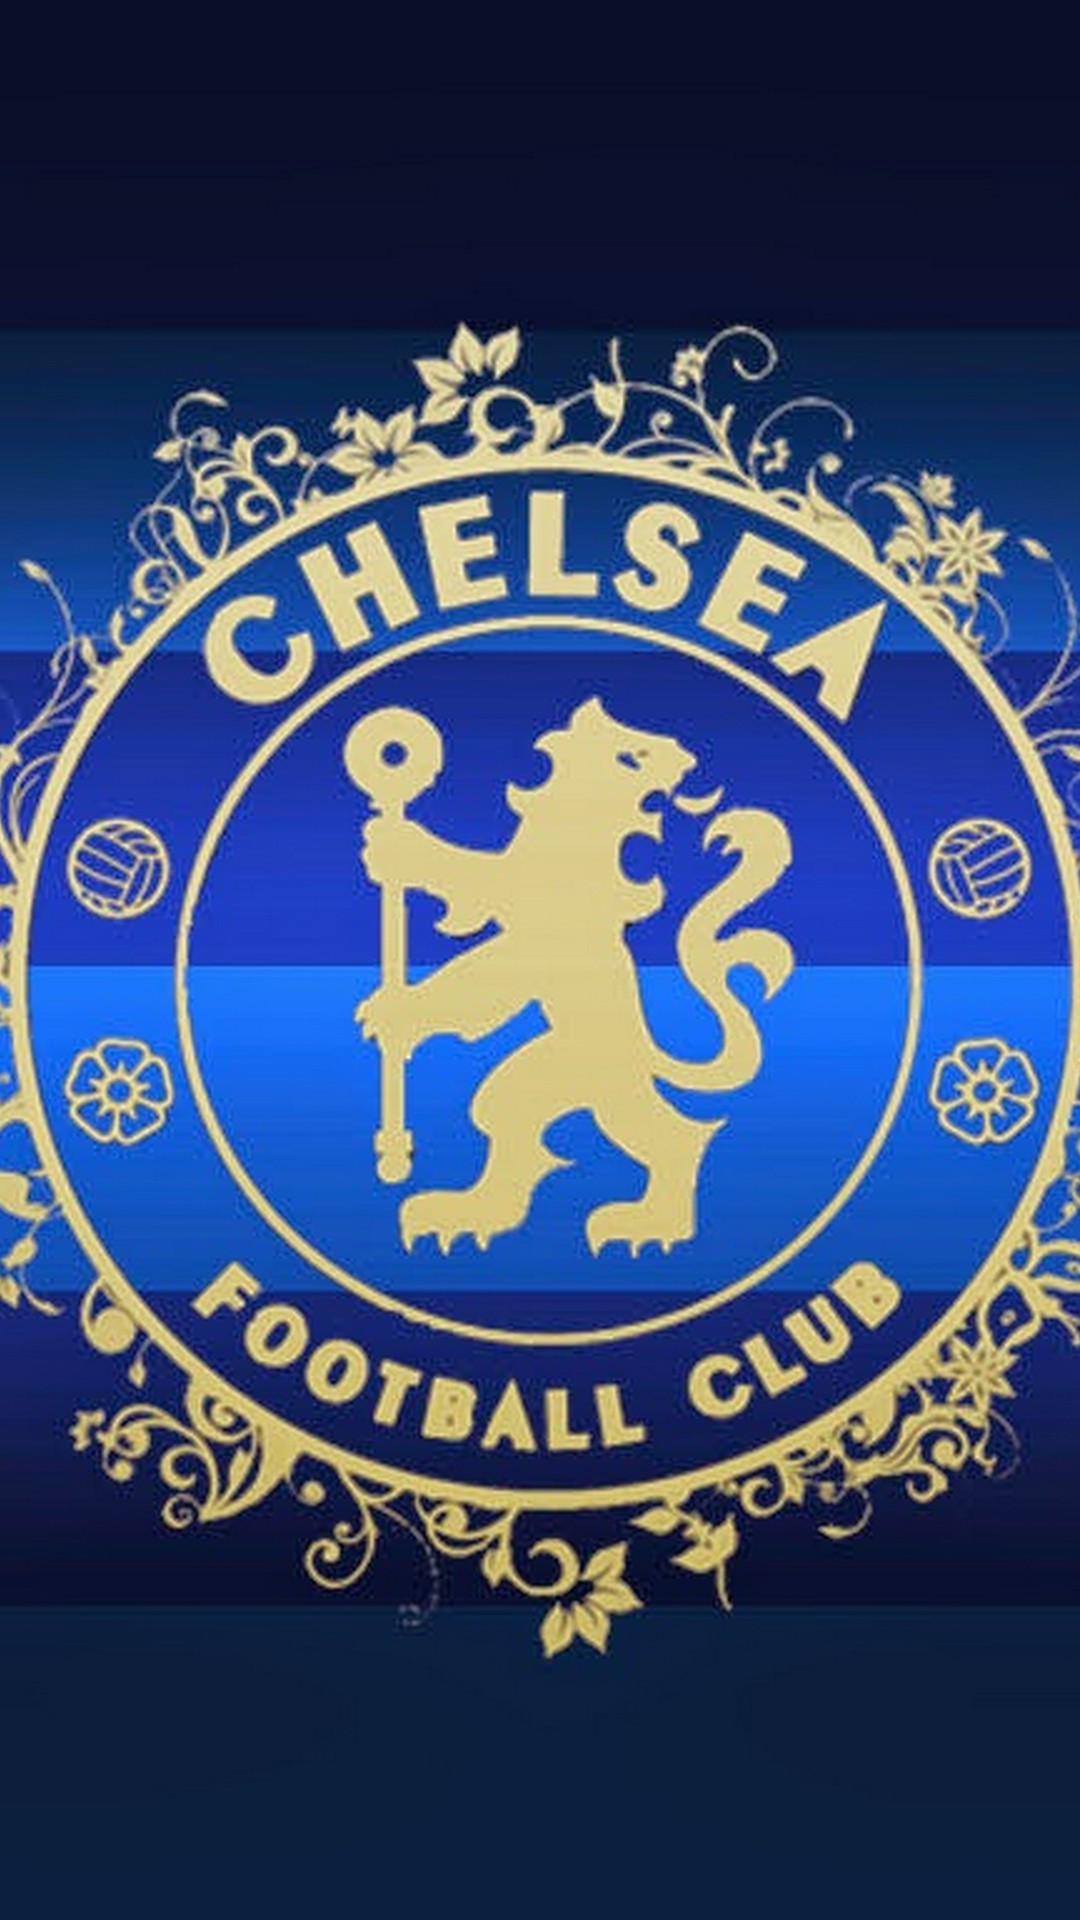 iPhone Wallpaper HD Chelsea Soccer With Resolution 1080X1920 pixel. You can make this wallpaper for your Mac or Windows Desktop Background, iPhone, Android or Tablet and another Smartphone device for free